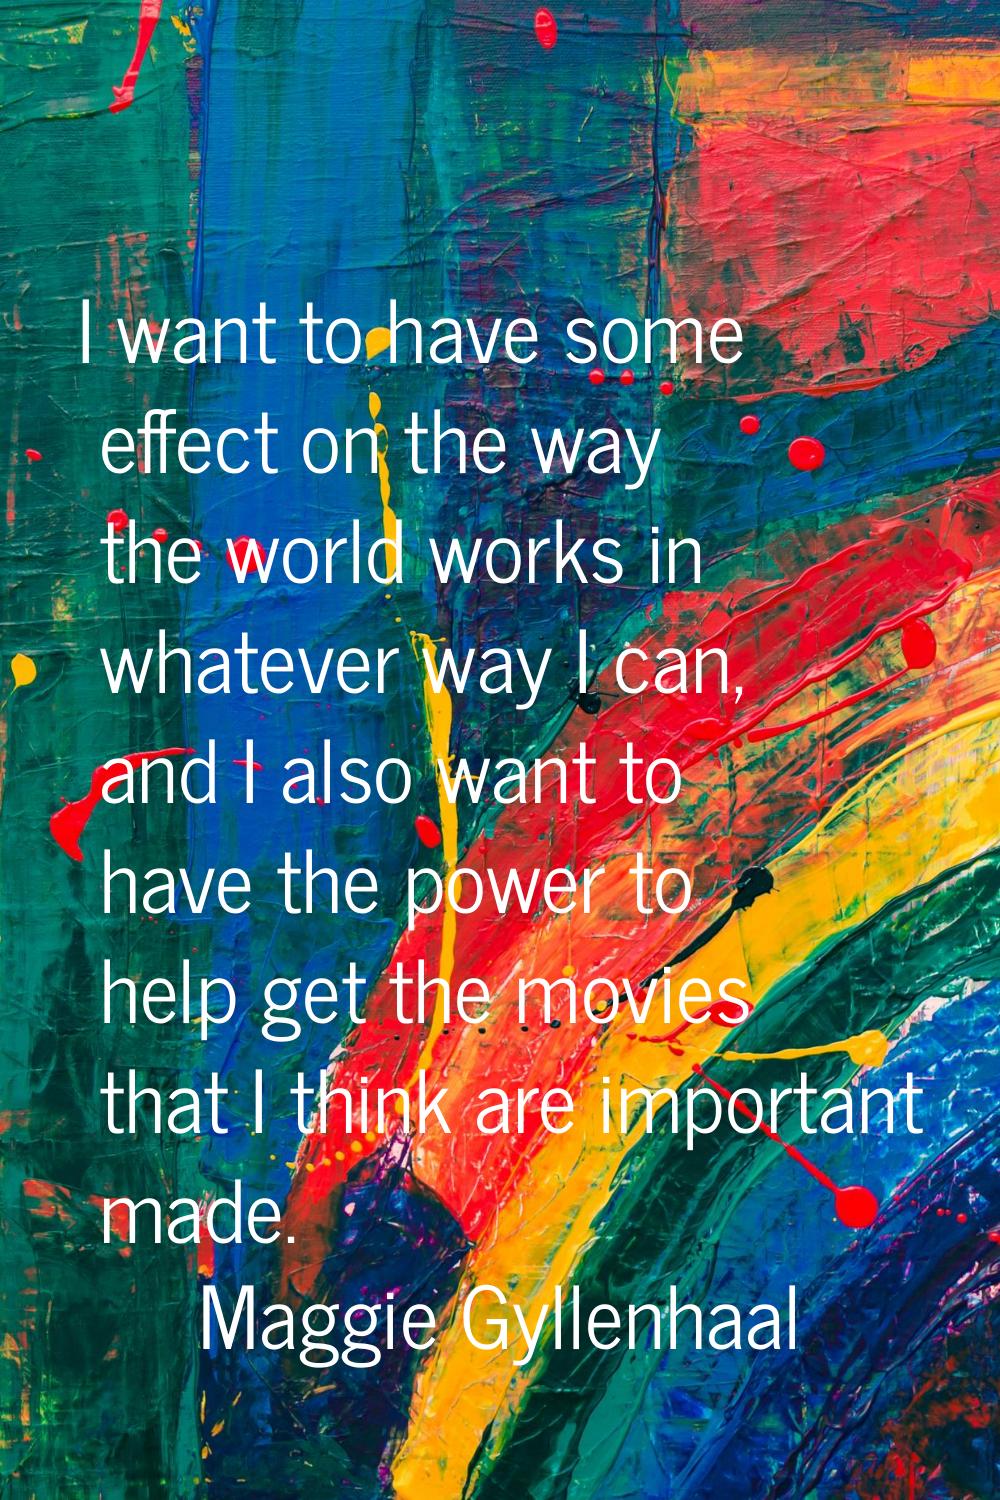 I want to have some effect on the way the world works in whatever way I can, and I also want to hav